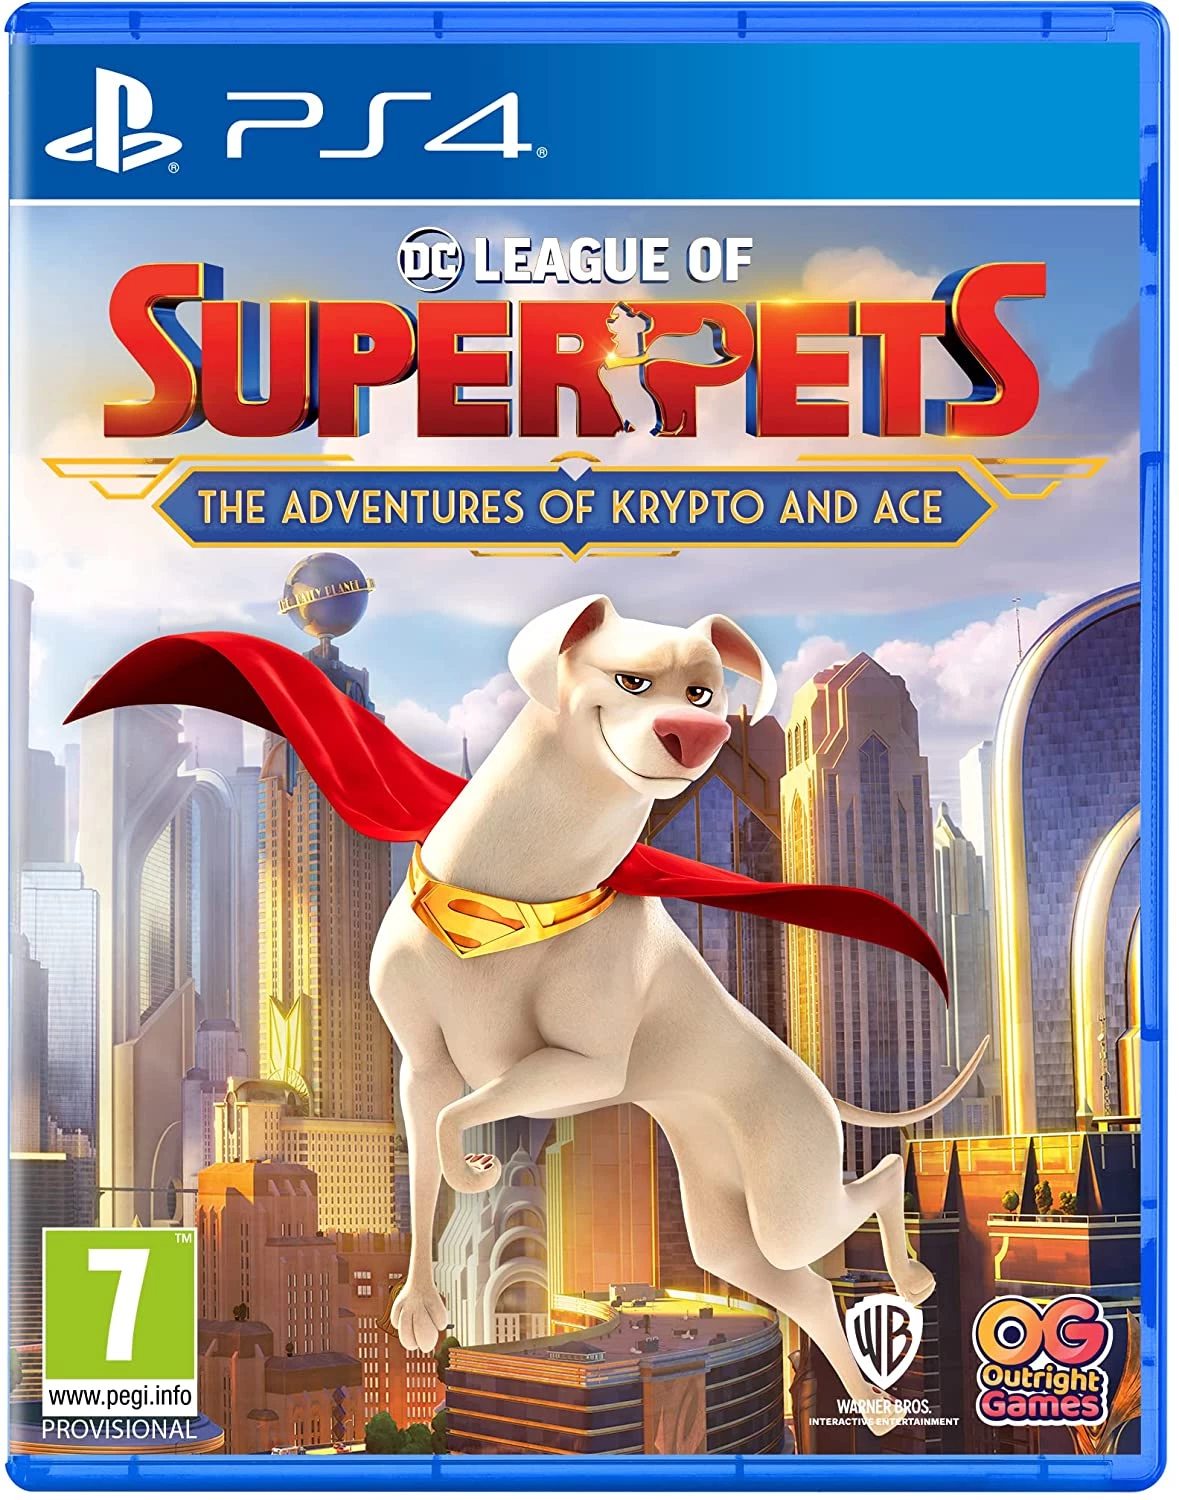 DC League of Super-Pets: The Adventures of Krypto and Ace (PS4), Outright Games